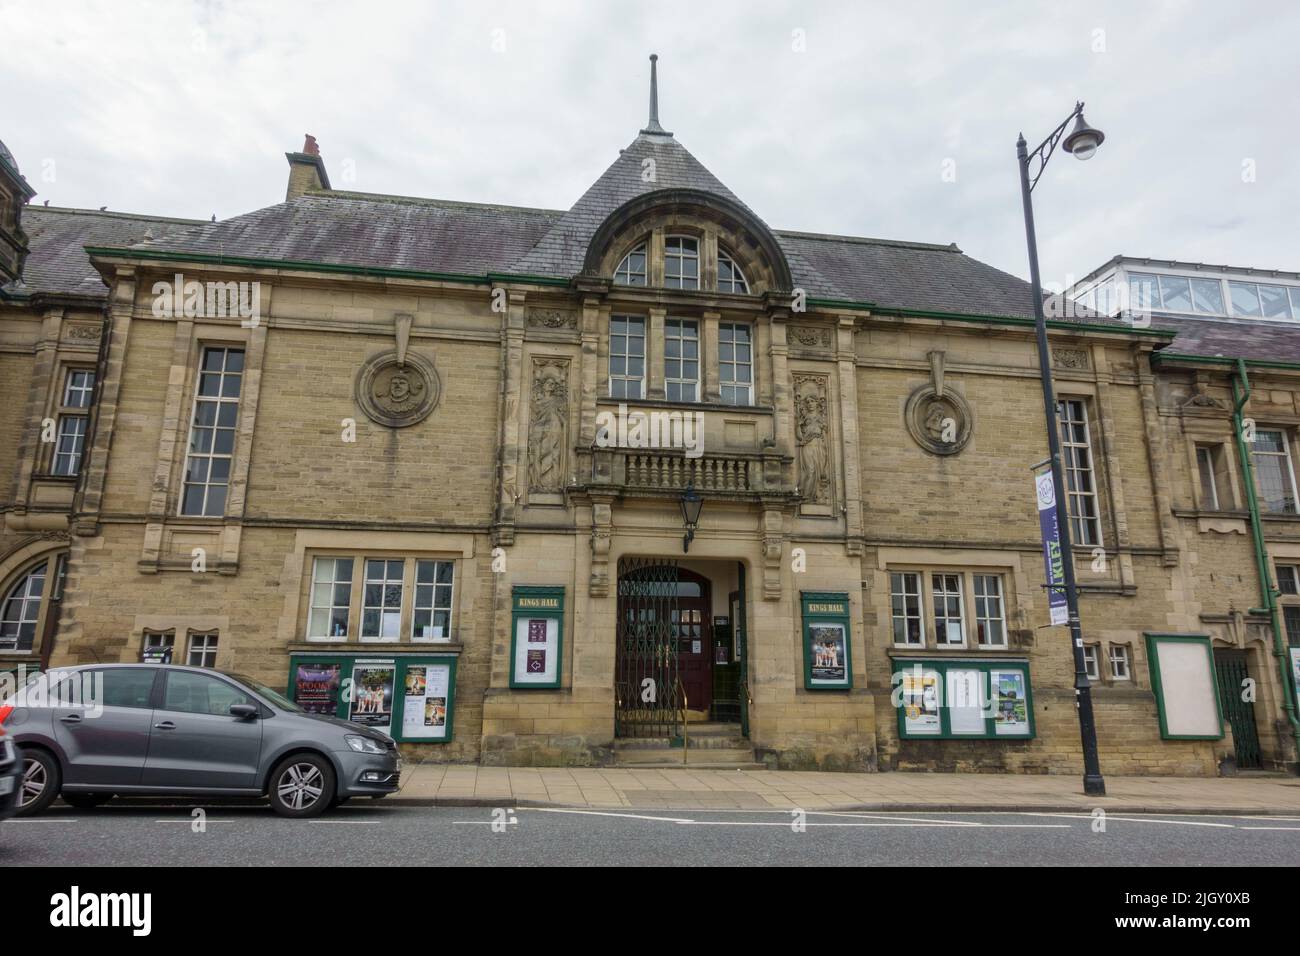 King's Hall and Winter Garden, Ilkley, a spa town and civil parish in the City of Bradford in West Yorkshire, UK. Stock Photo